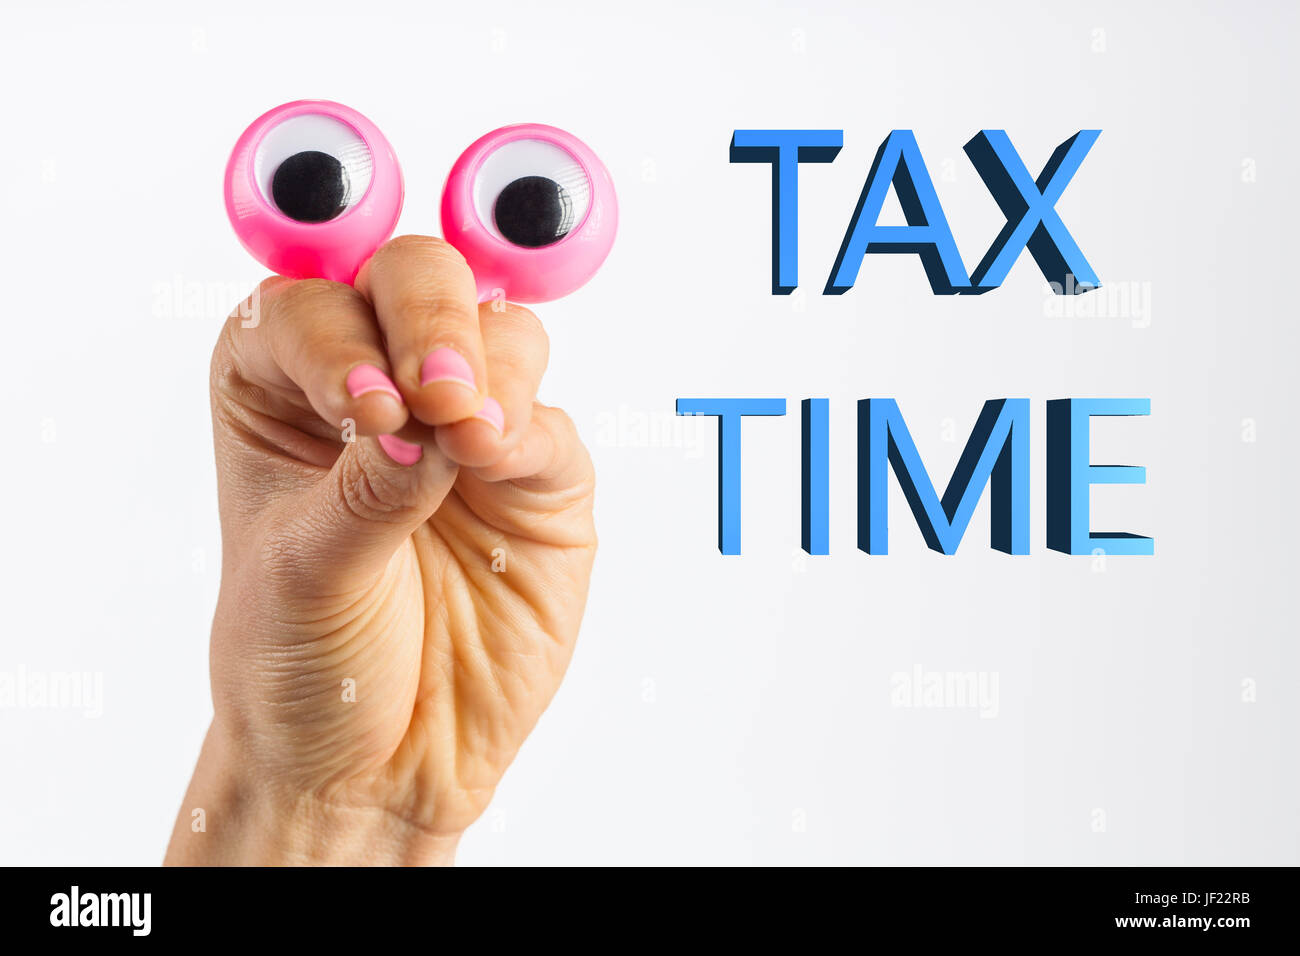 Funny character creature looking surprised and and trying to intimidate the viewer with words Tax Time. Depicted with female hand and googly eyes. Iso Stock Photo